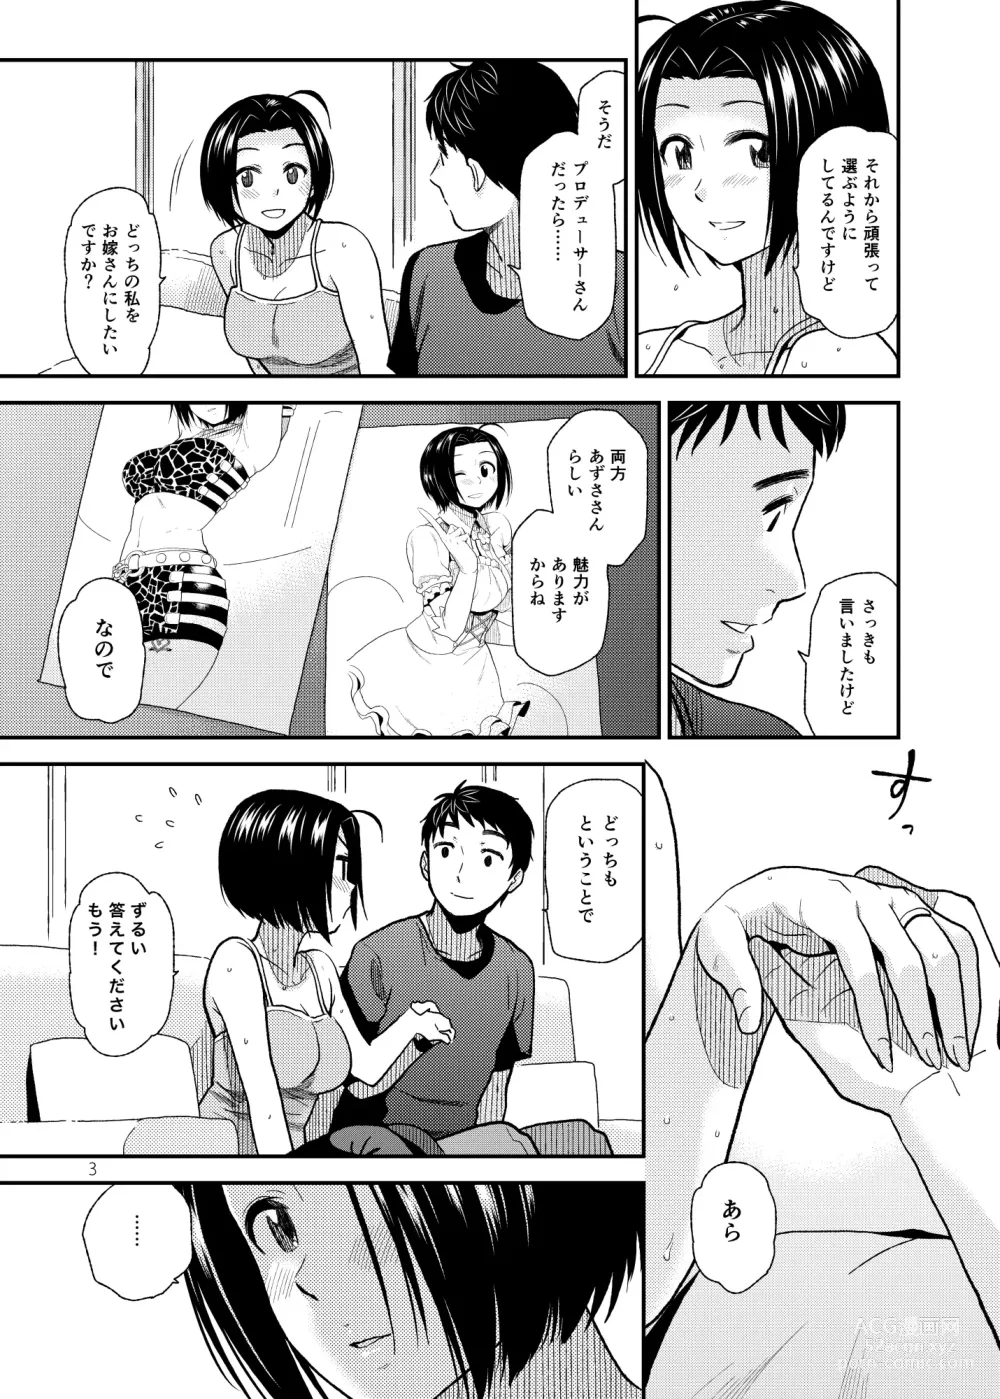 Page 4 of doujinshi Tender Time 2